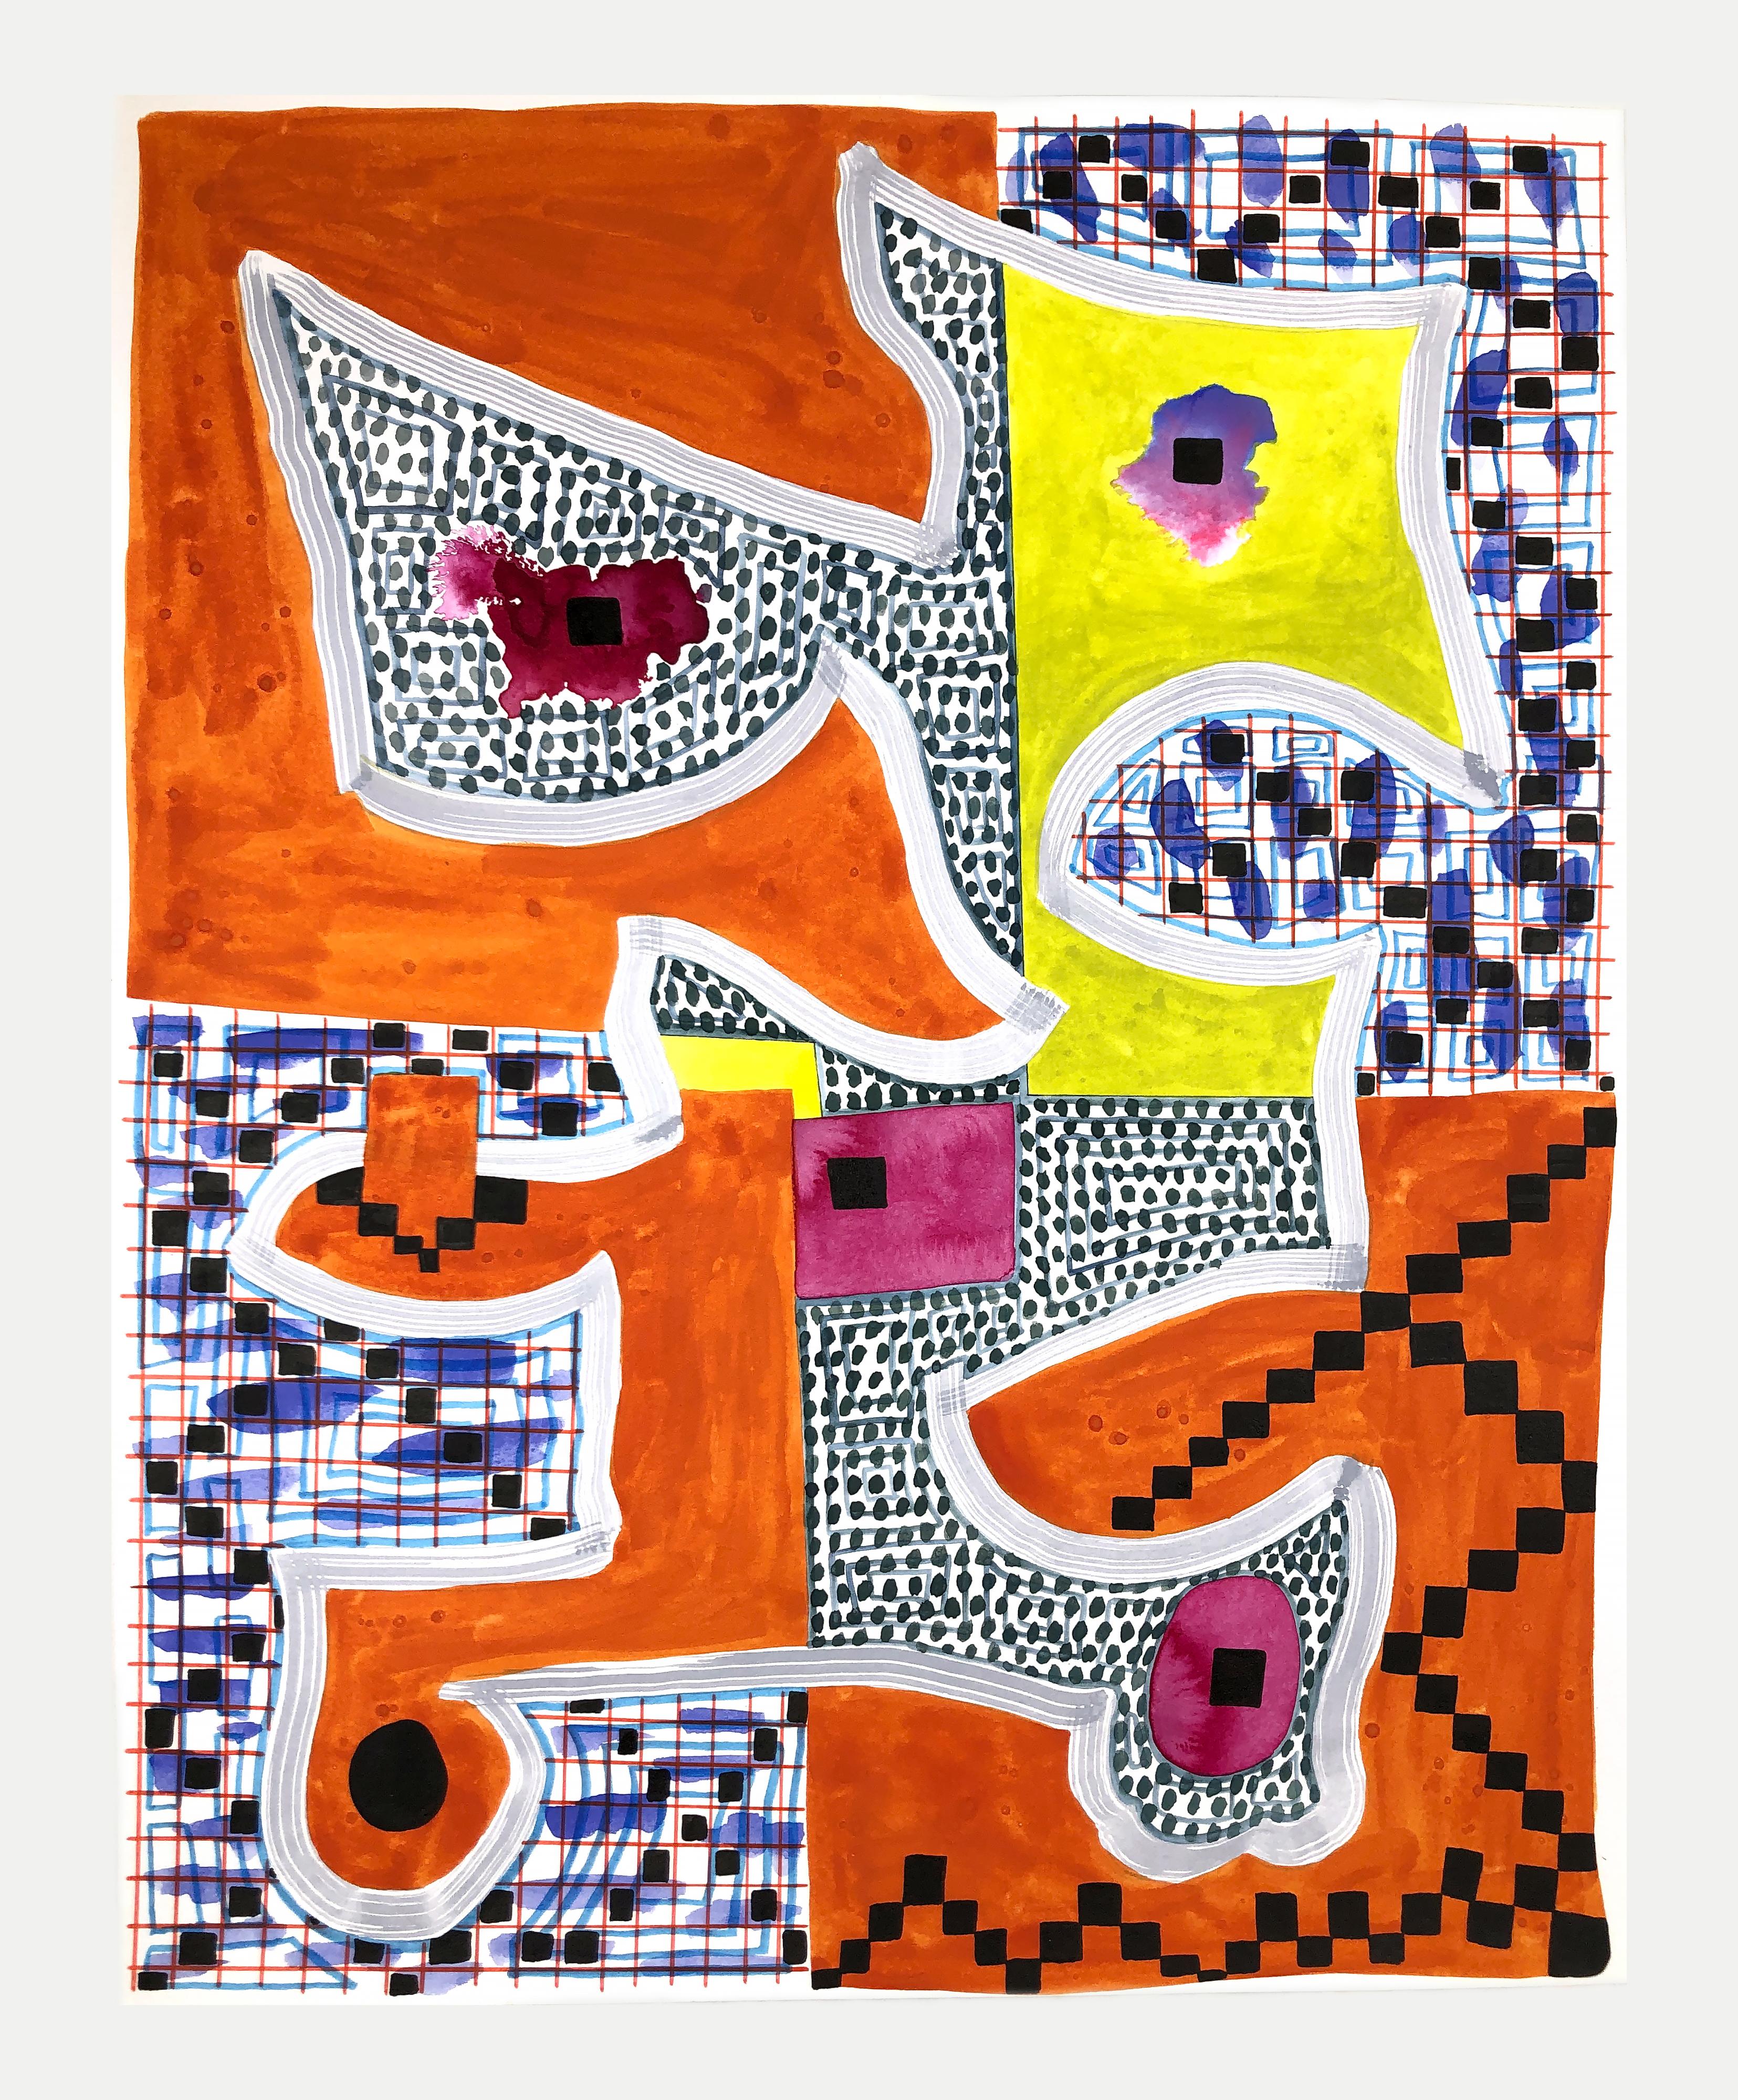 Contemporary abstract geometric colorful patterned painting by Texas-based artist Max Manning. The work features organic and  geometric shapes in orange, yellow, black, and white. Signed by the artist on the back of the canvas. Currently unframed,